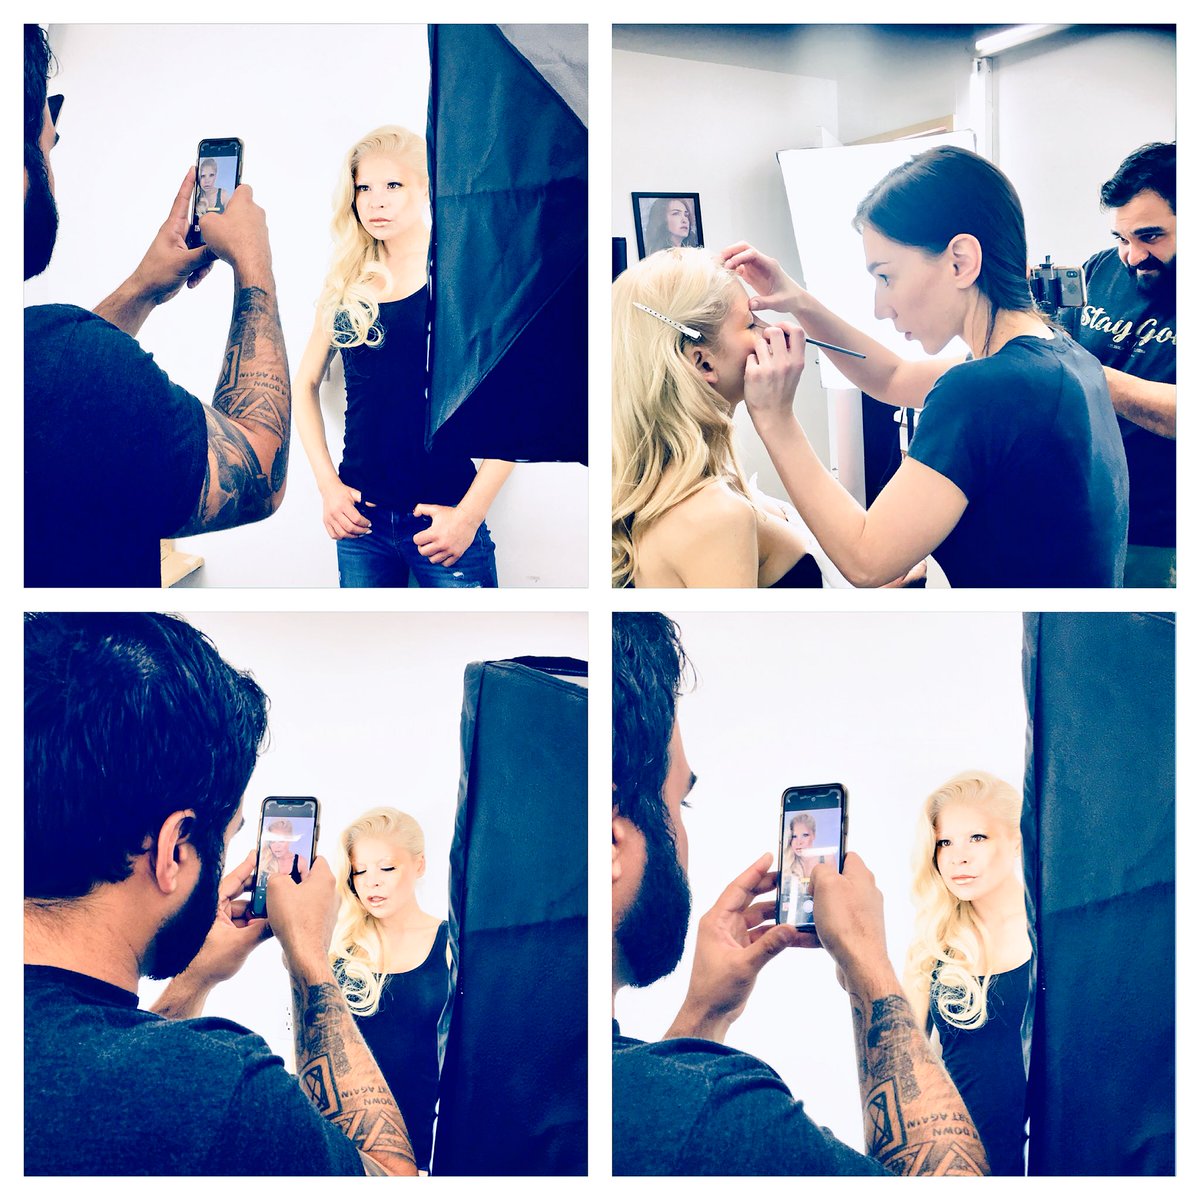 #Behindthescenes #BTS on a #photoshoot for @MelProducts #melproducts #melproductsusa new line of #products thanks to #MUA @ms.poise.mua & @ajapone #sfxmakeup #sfx @badfishsfx @annemcdaniels #annemcdaniels #model. #CoolestStudio #MakeupEffectsLab #losangeles #actress #lightbrows